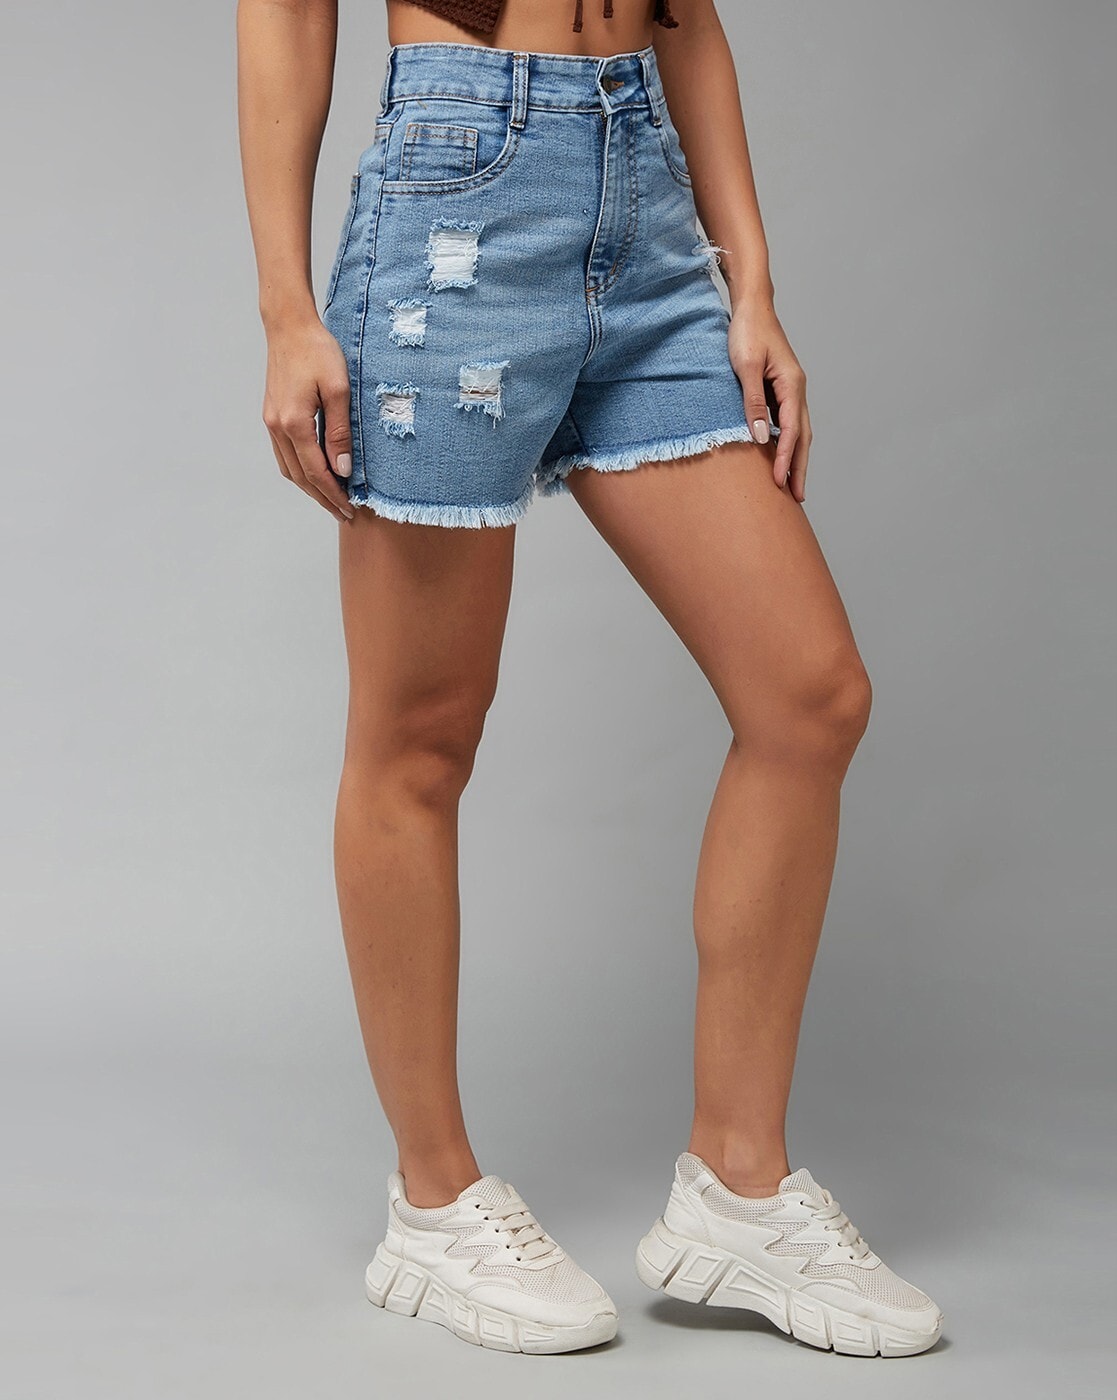 Women Sexy Distressed Ripped Holes High Waist Denim Shorts Stretch Short  Jeans Tassel Short Esg13548 - China Shorts and Denim Short price |  Made-in-China.com